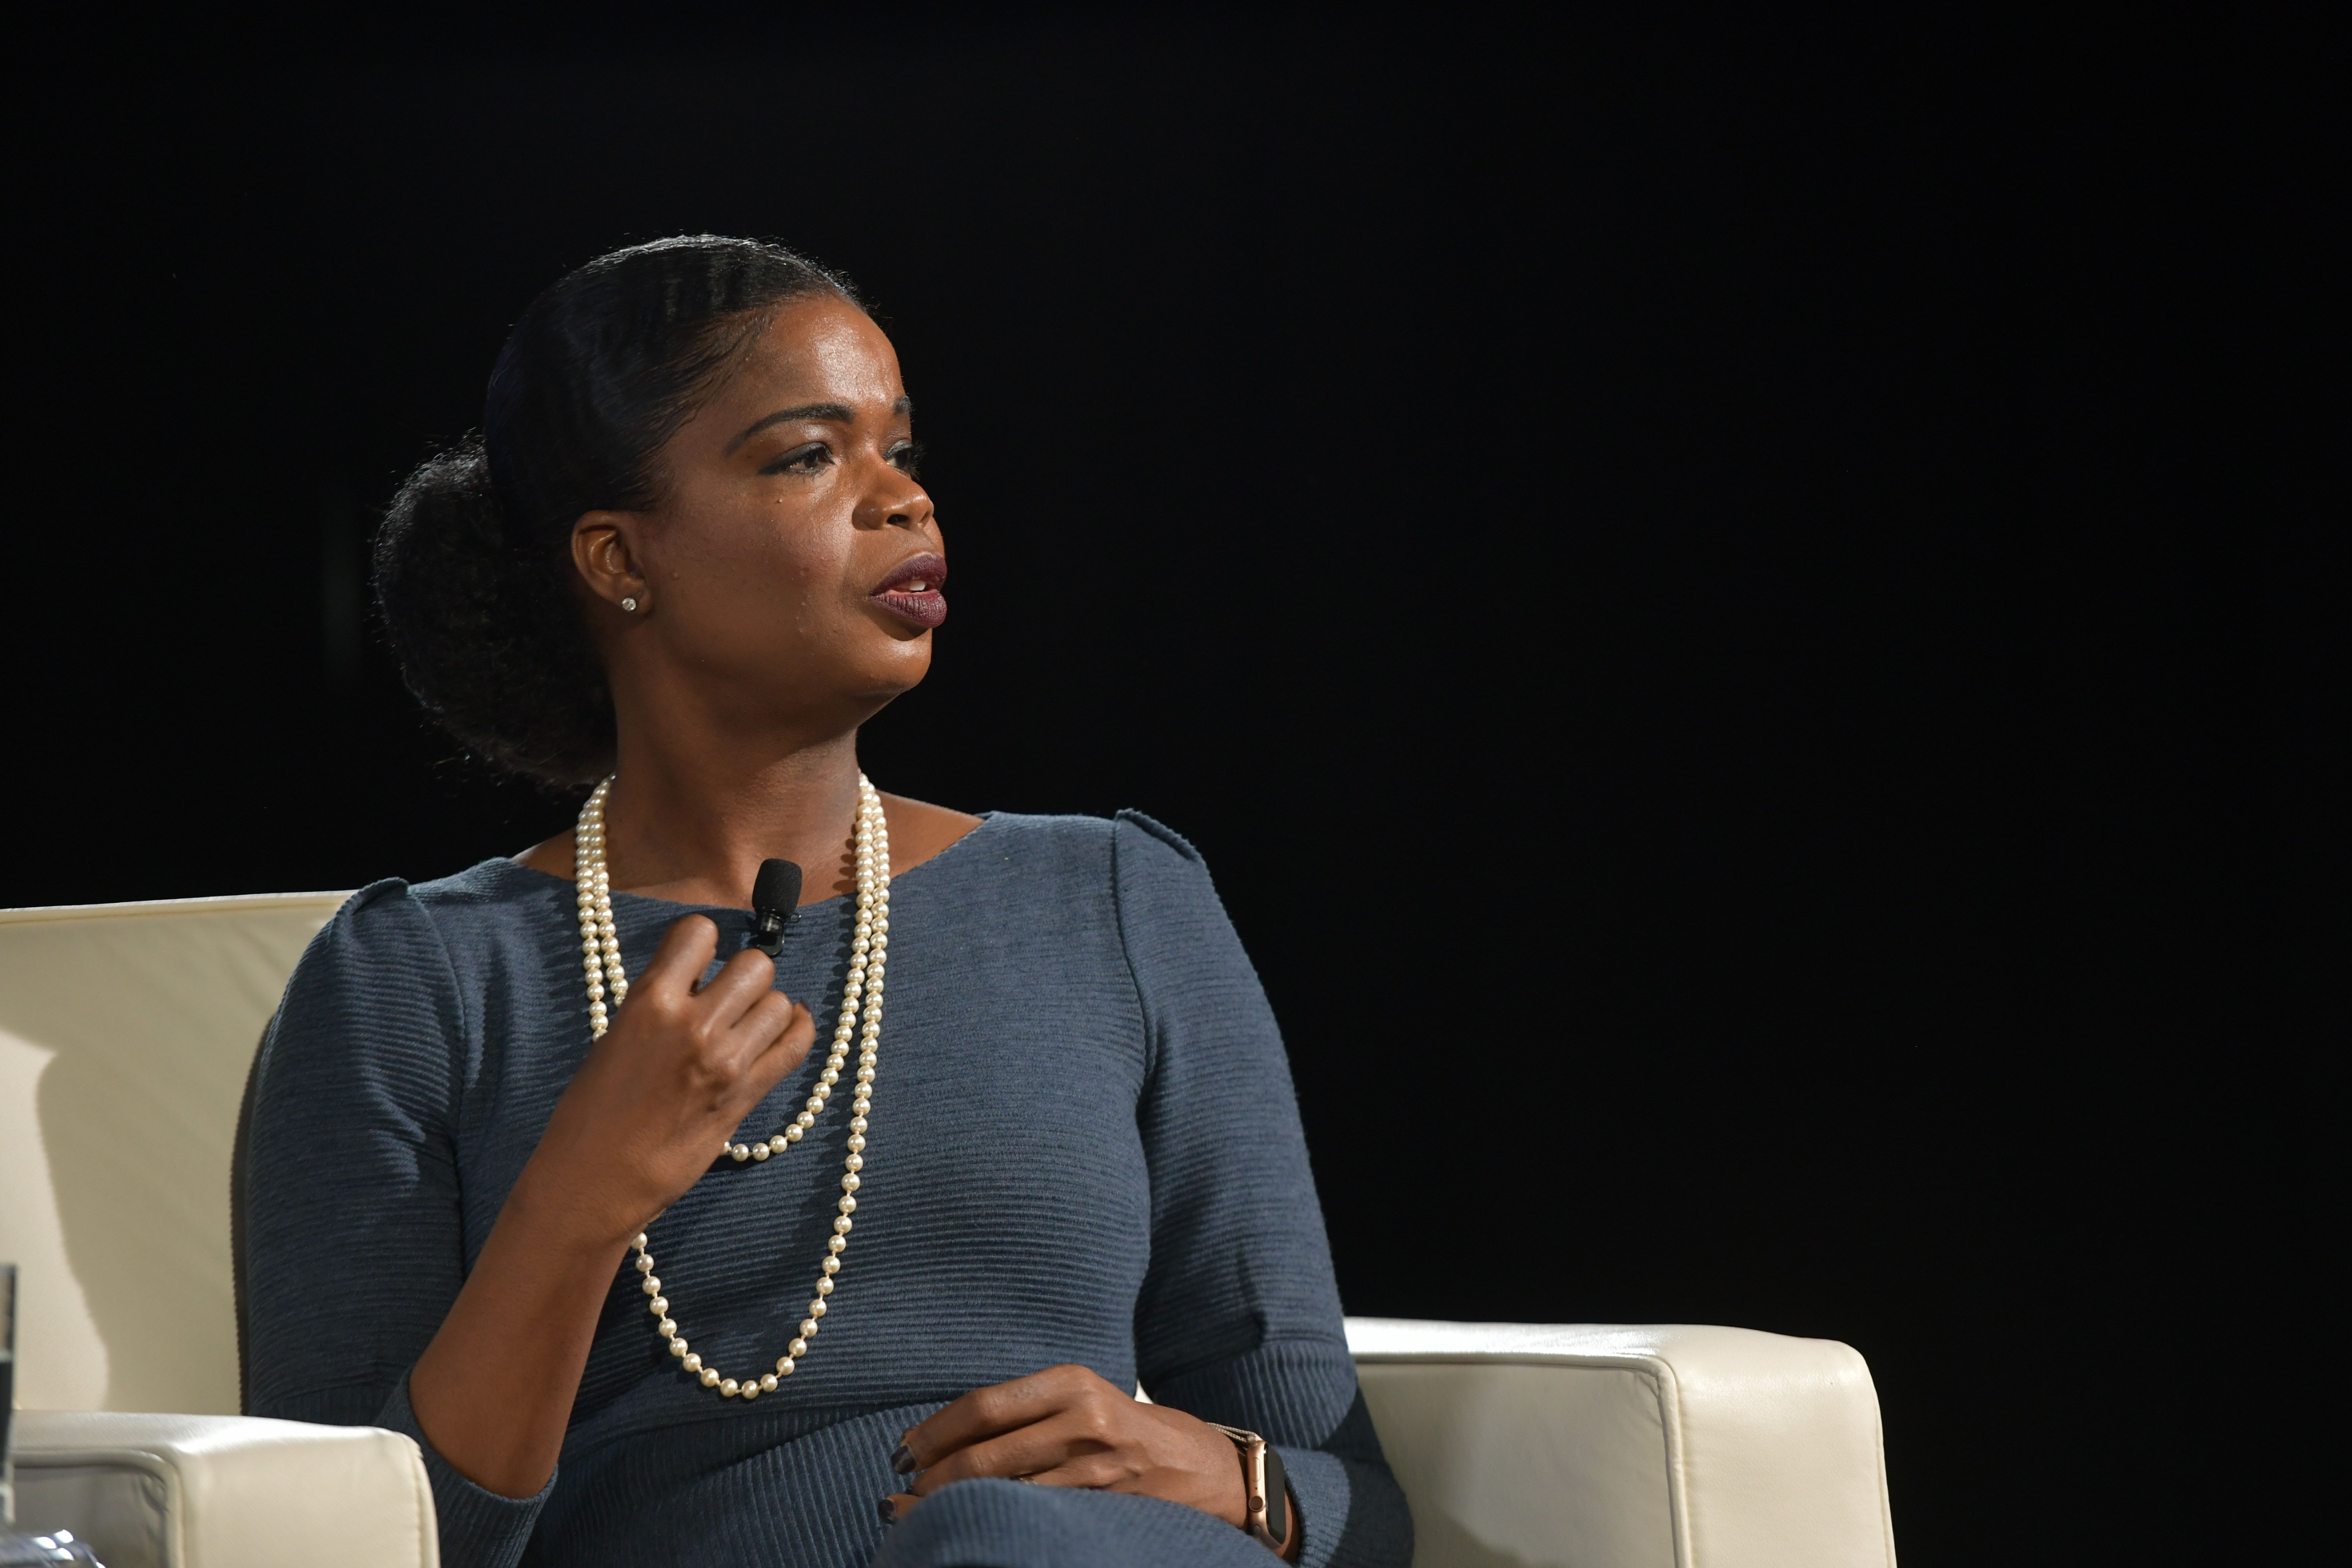 State's Attorney for Cook County, Illinois, Kim Foxx on the Axios stage.